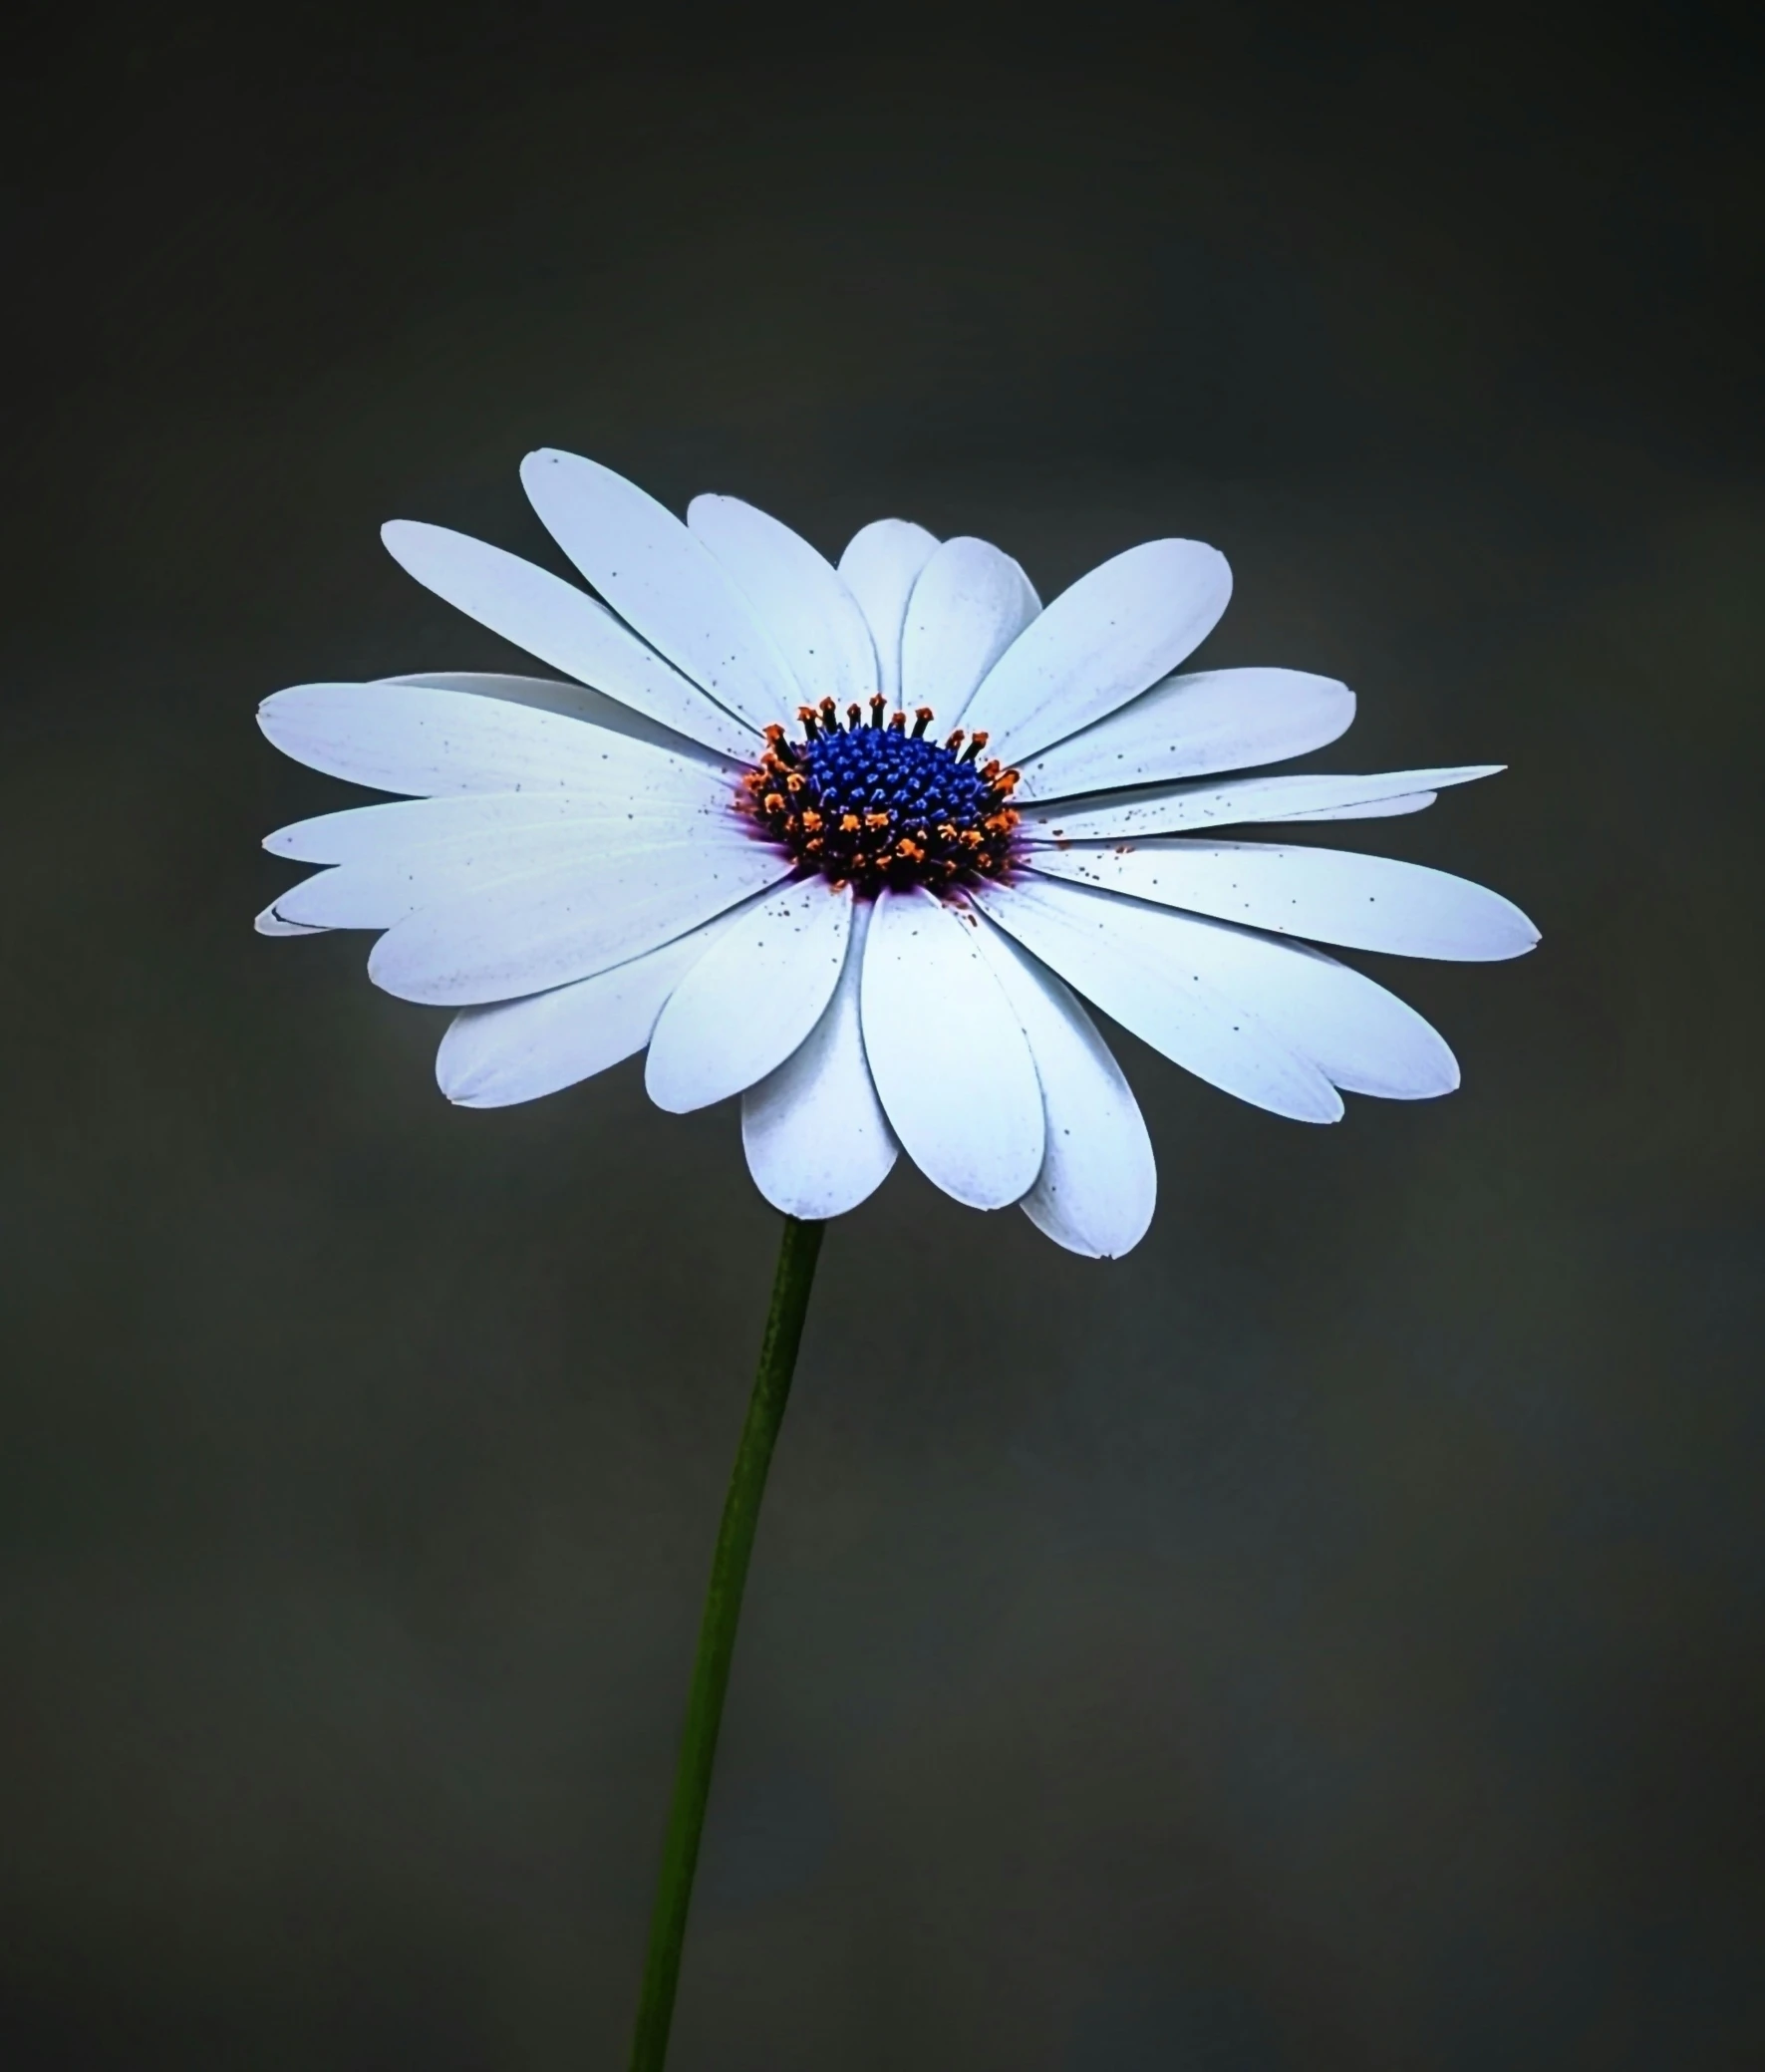 a single white flower with black and blue centers